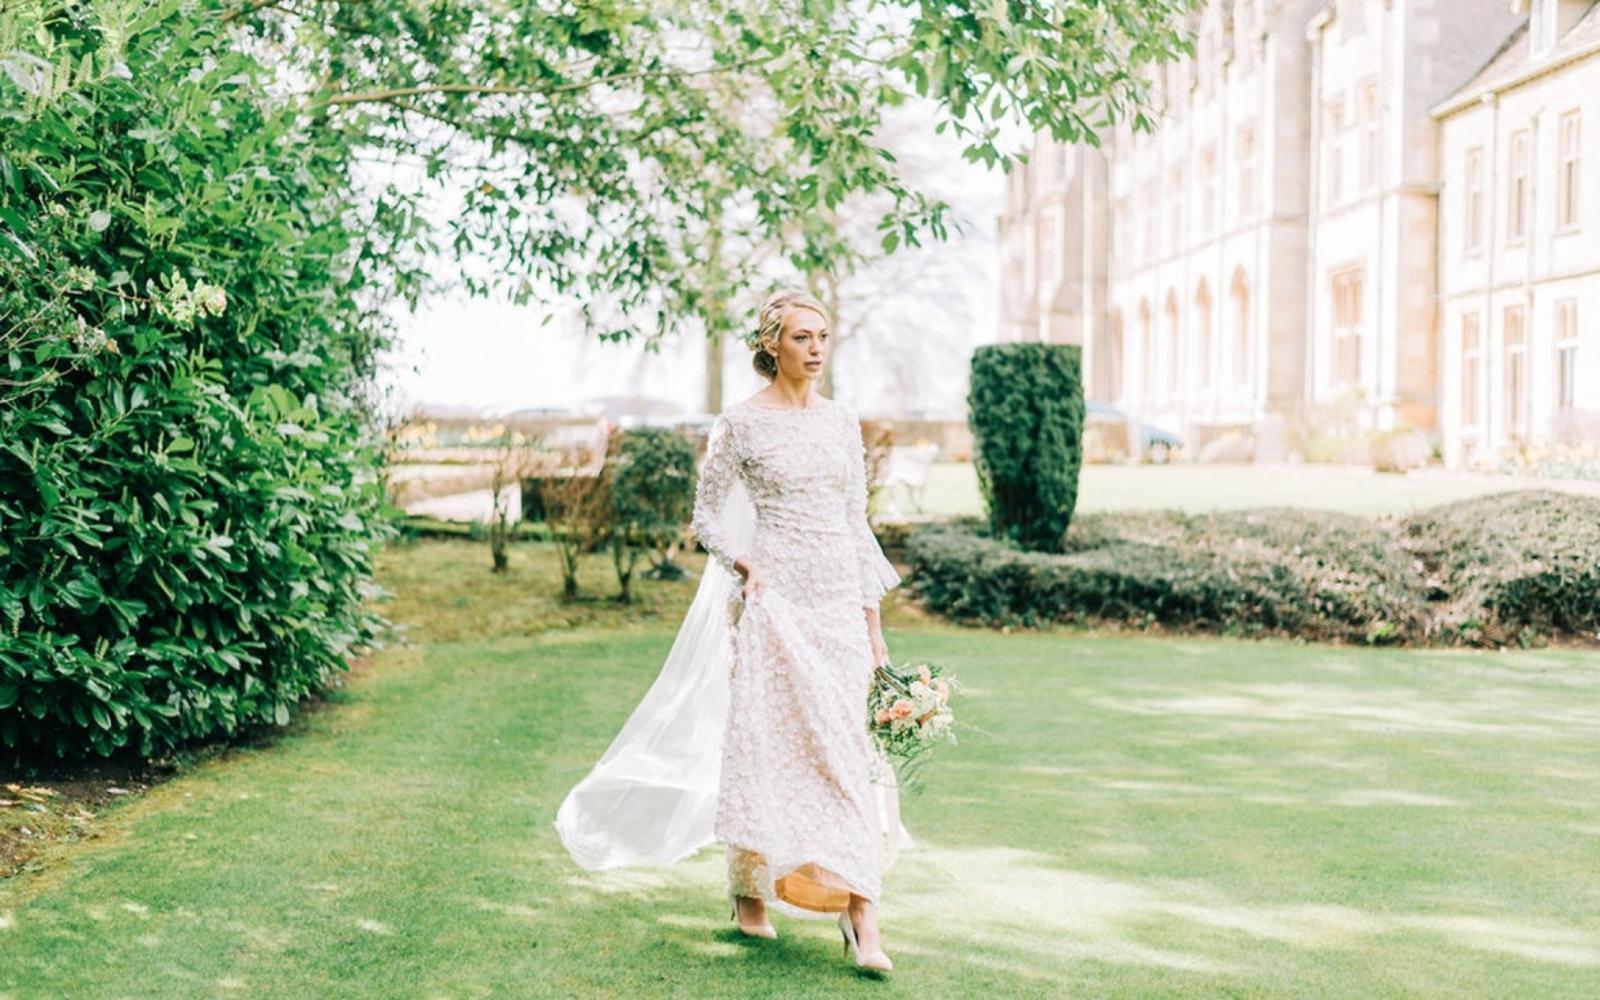 Corky and Prince Kimmi's Cakes Polly Morton Makeup Artist Dymond's Shoes and Accessories The Middle Green My eden Rachel Jane Photography styled shoot at The Royal Agricultural University wedding venue Cirencester eco-friendly artisan sustainable relaxed bride